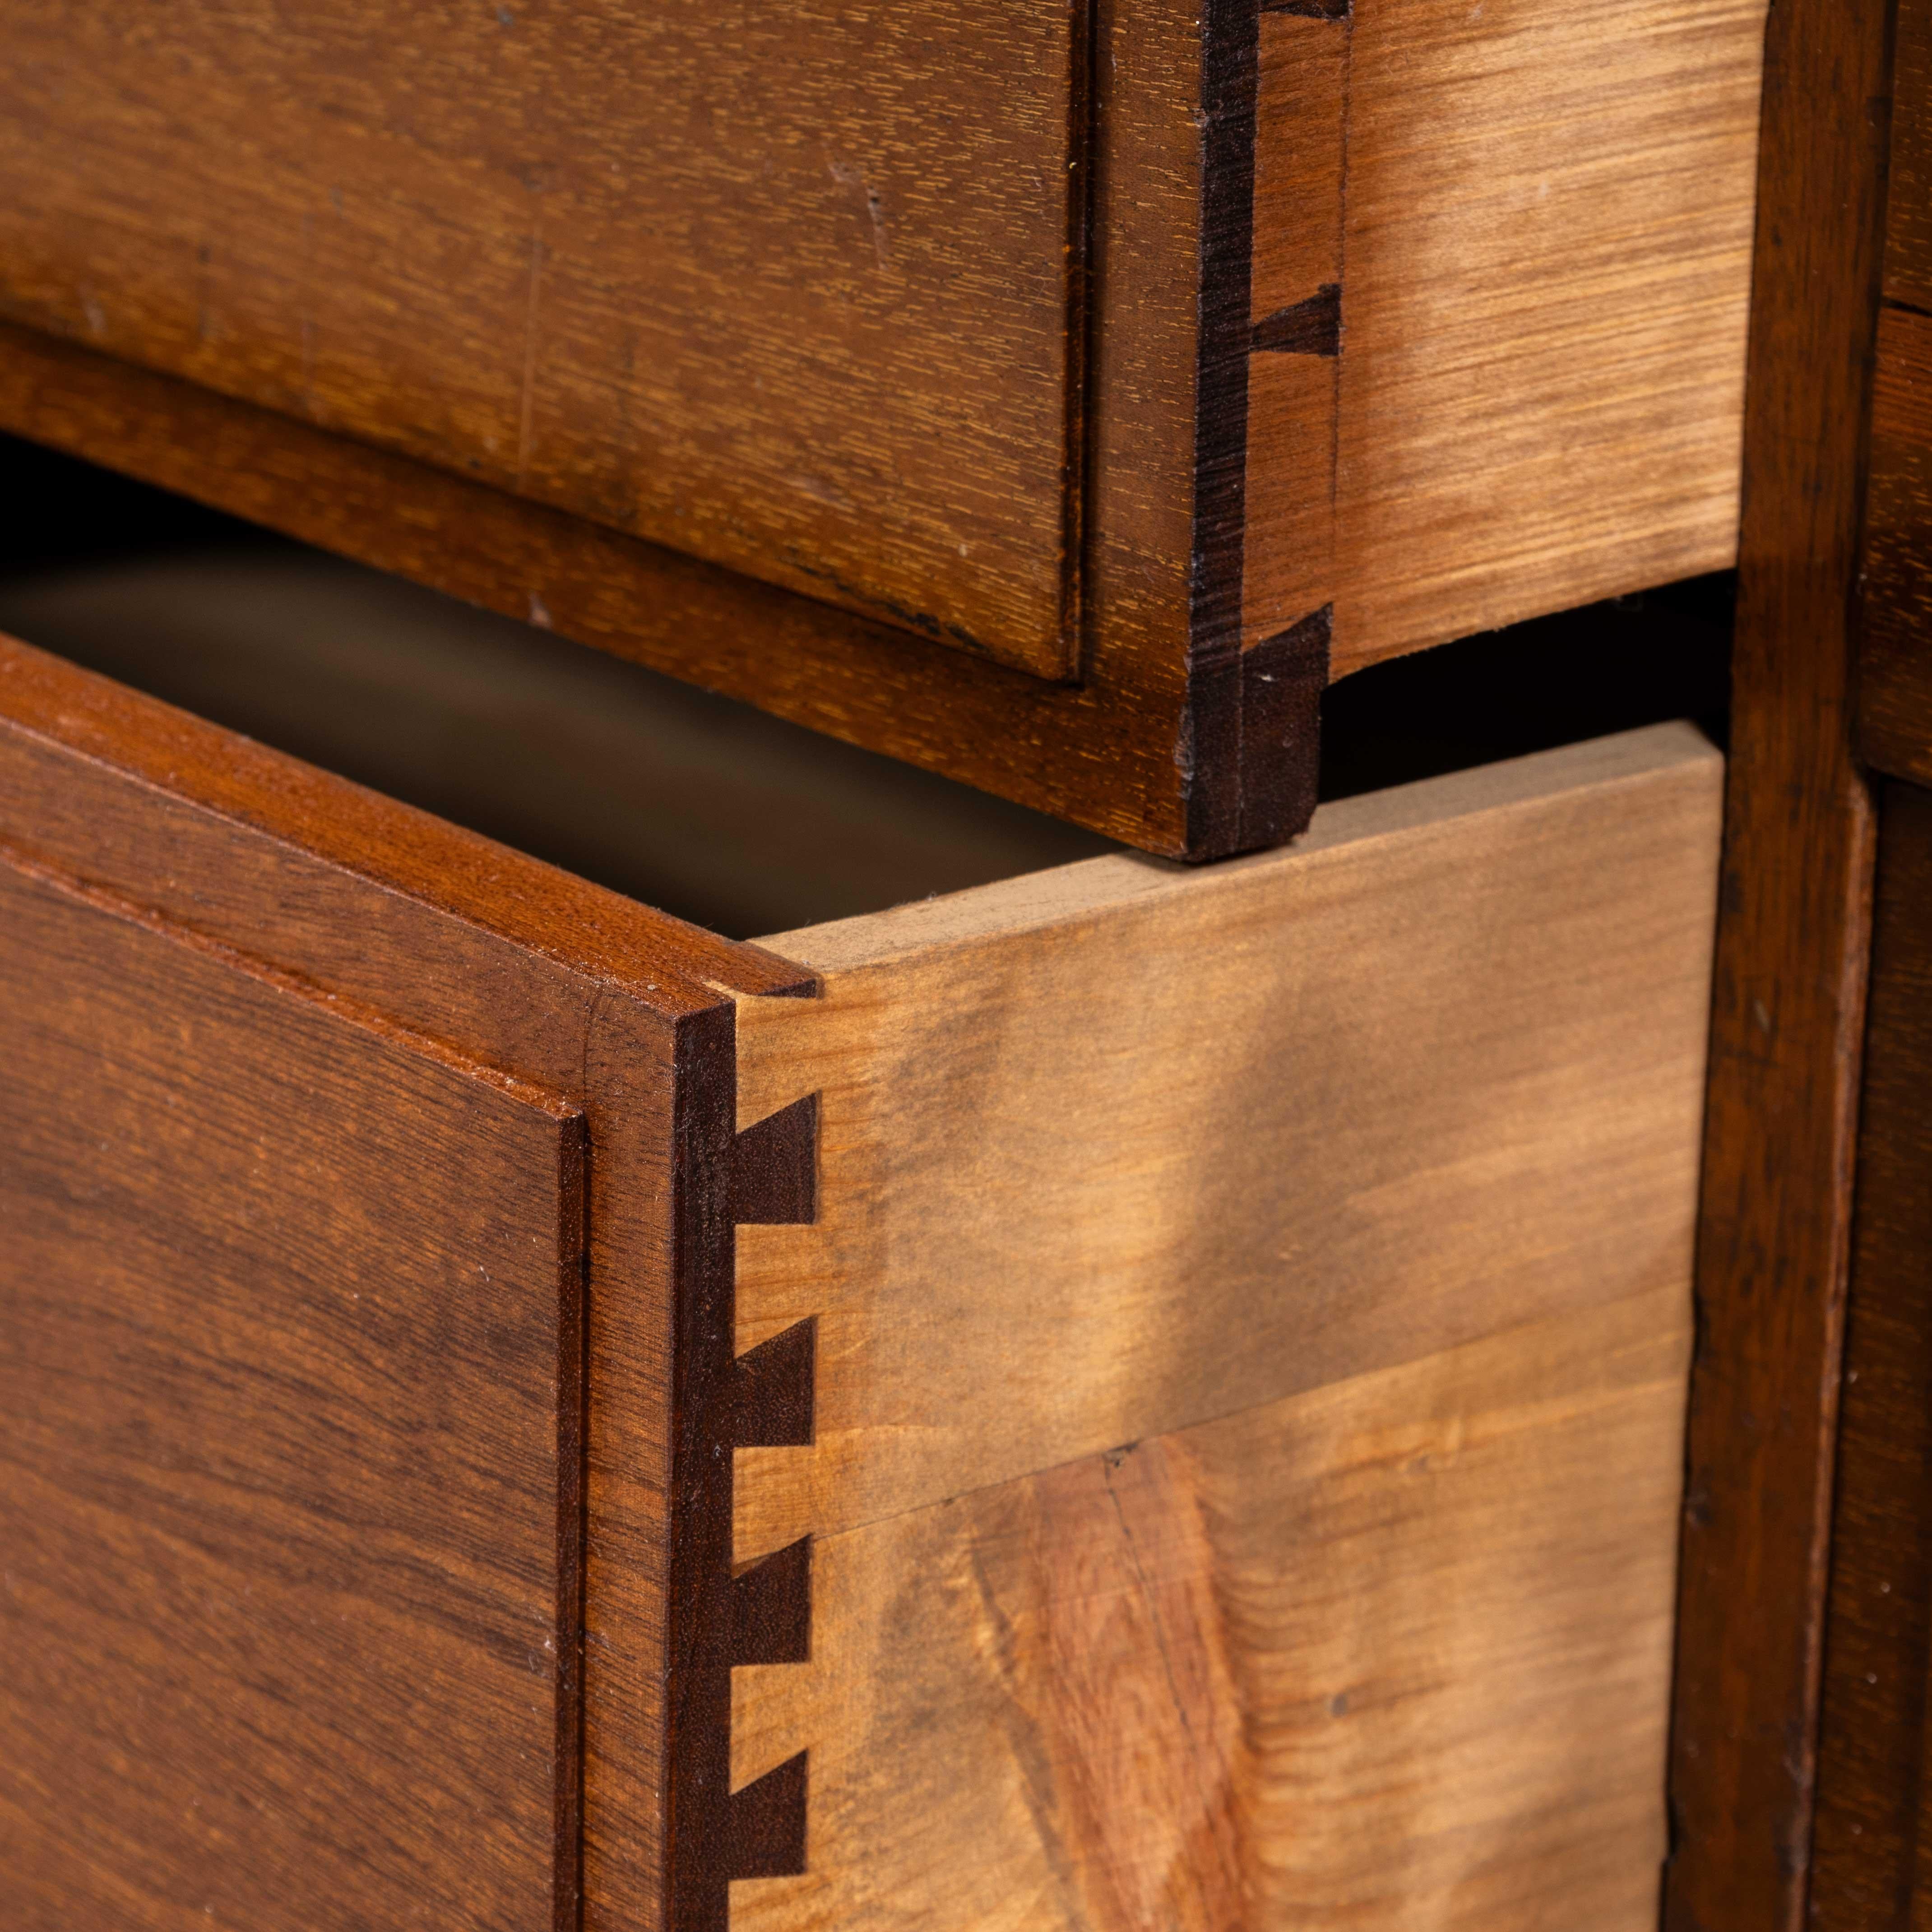 19th Century Original Mahogany Tailors Bank Of Drawers
19th Century Original Mahogany Tailors Bank Of Drawers. Unusual English bank of drawers from a tailors shop. The drawer unit is beautifully made with panelled construction throughout, dovetail